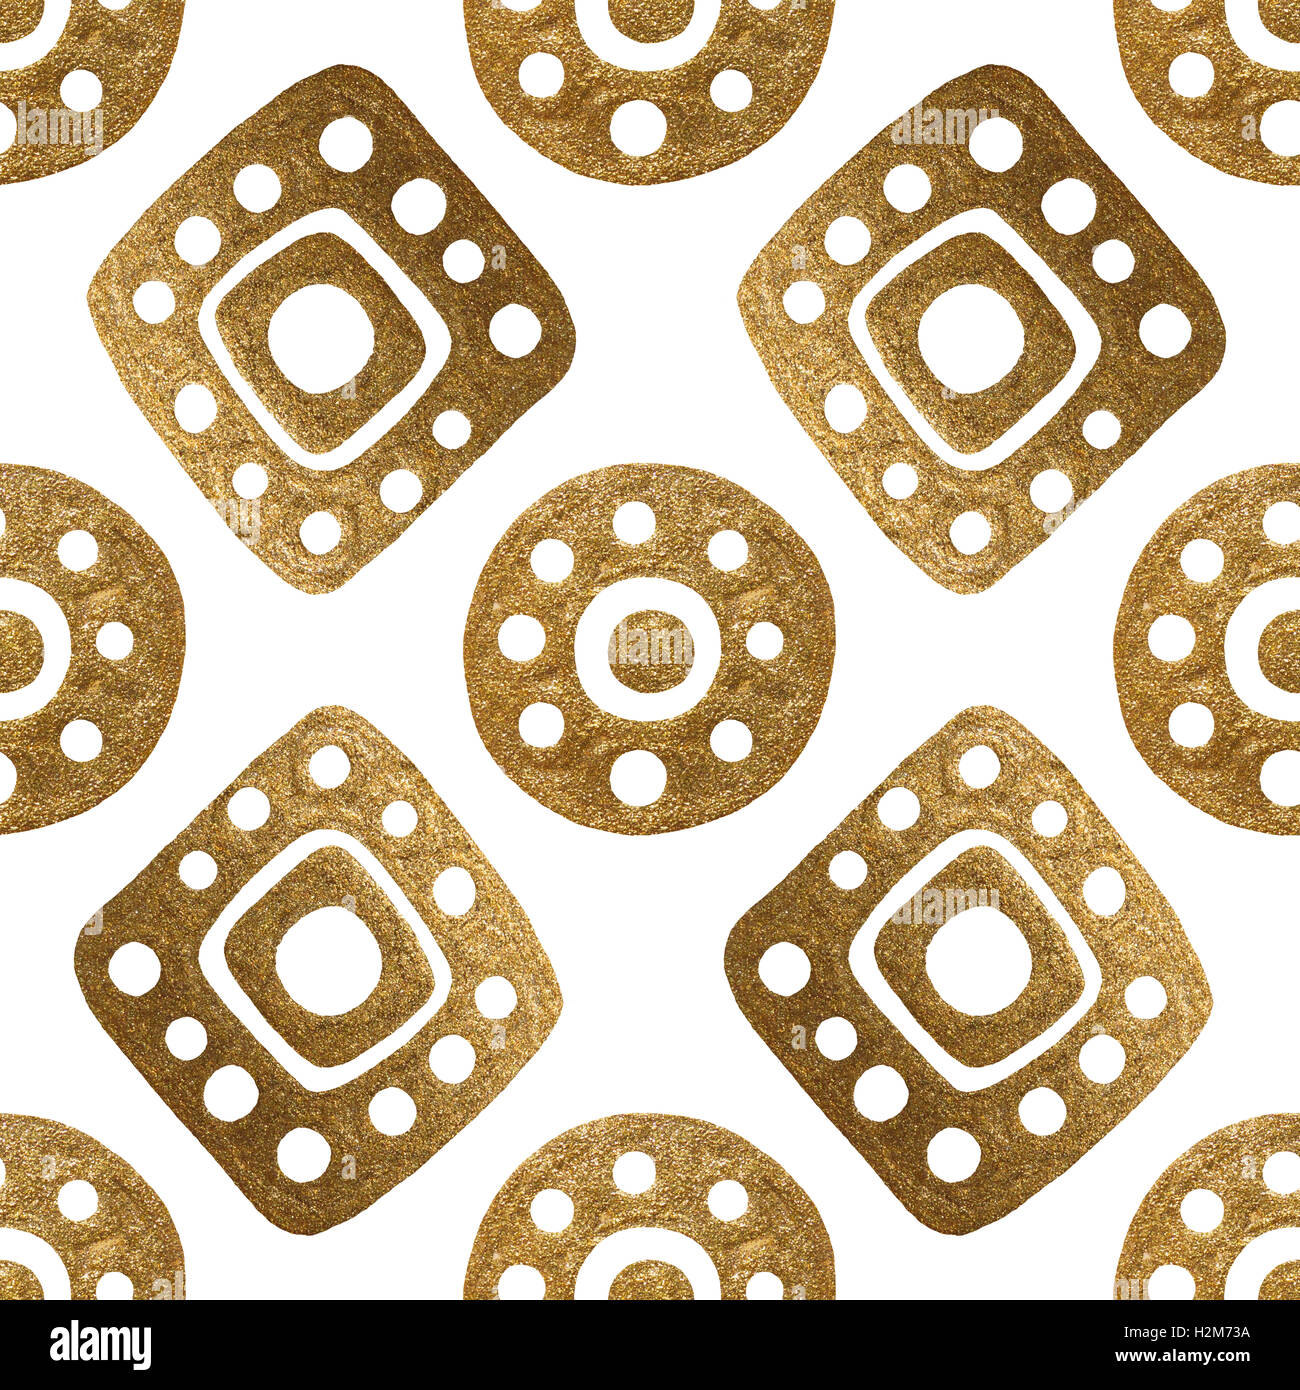 Tribal vintage ethnic seamless pattern. Hand drawn gold background. Stock Photo